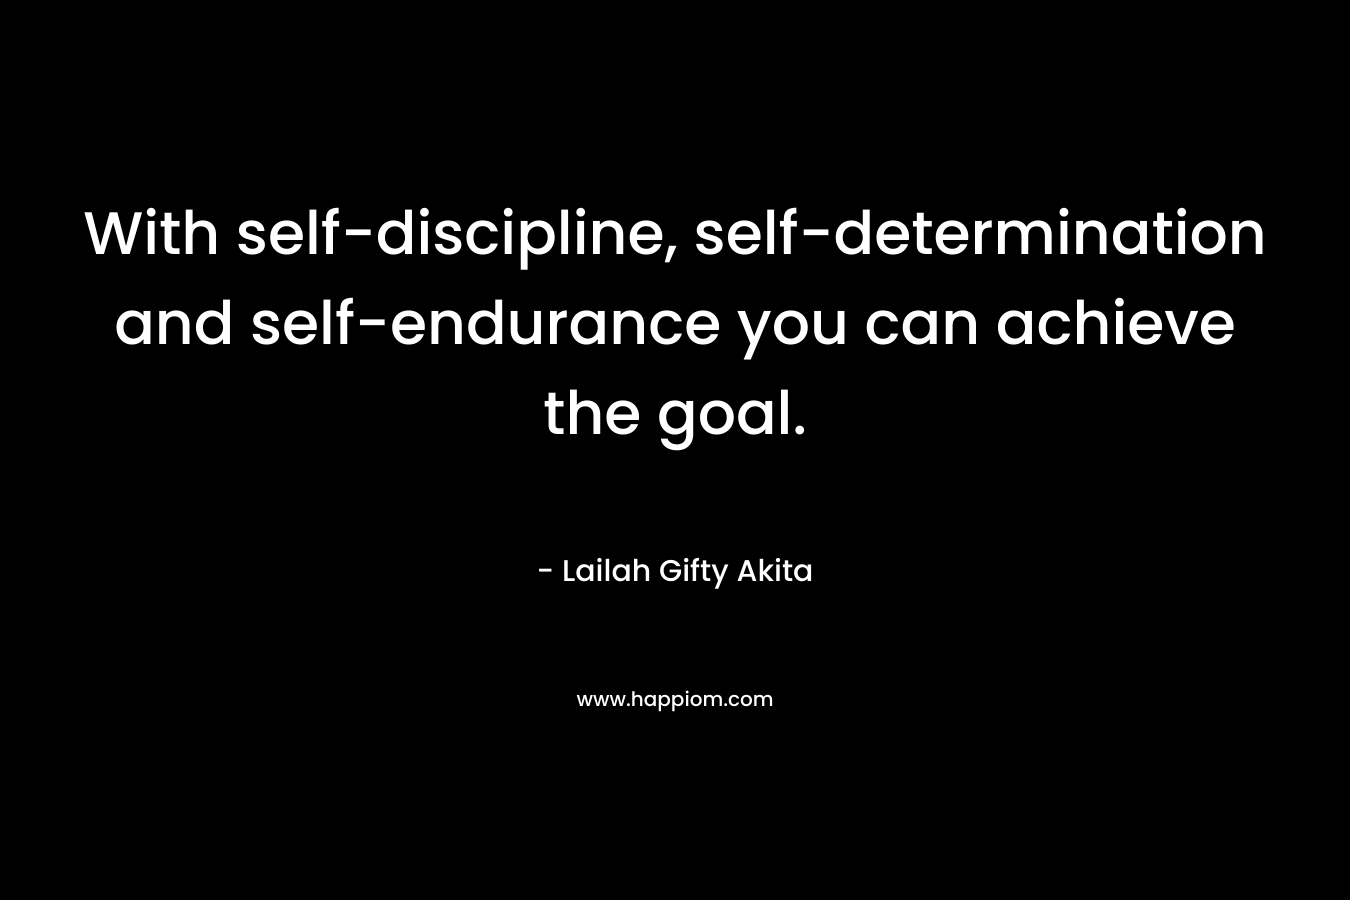 With self-discipline, self-determination and self-endurance you can achieve the goal.